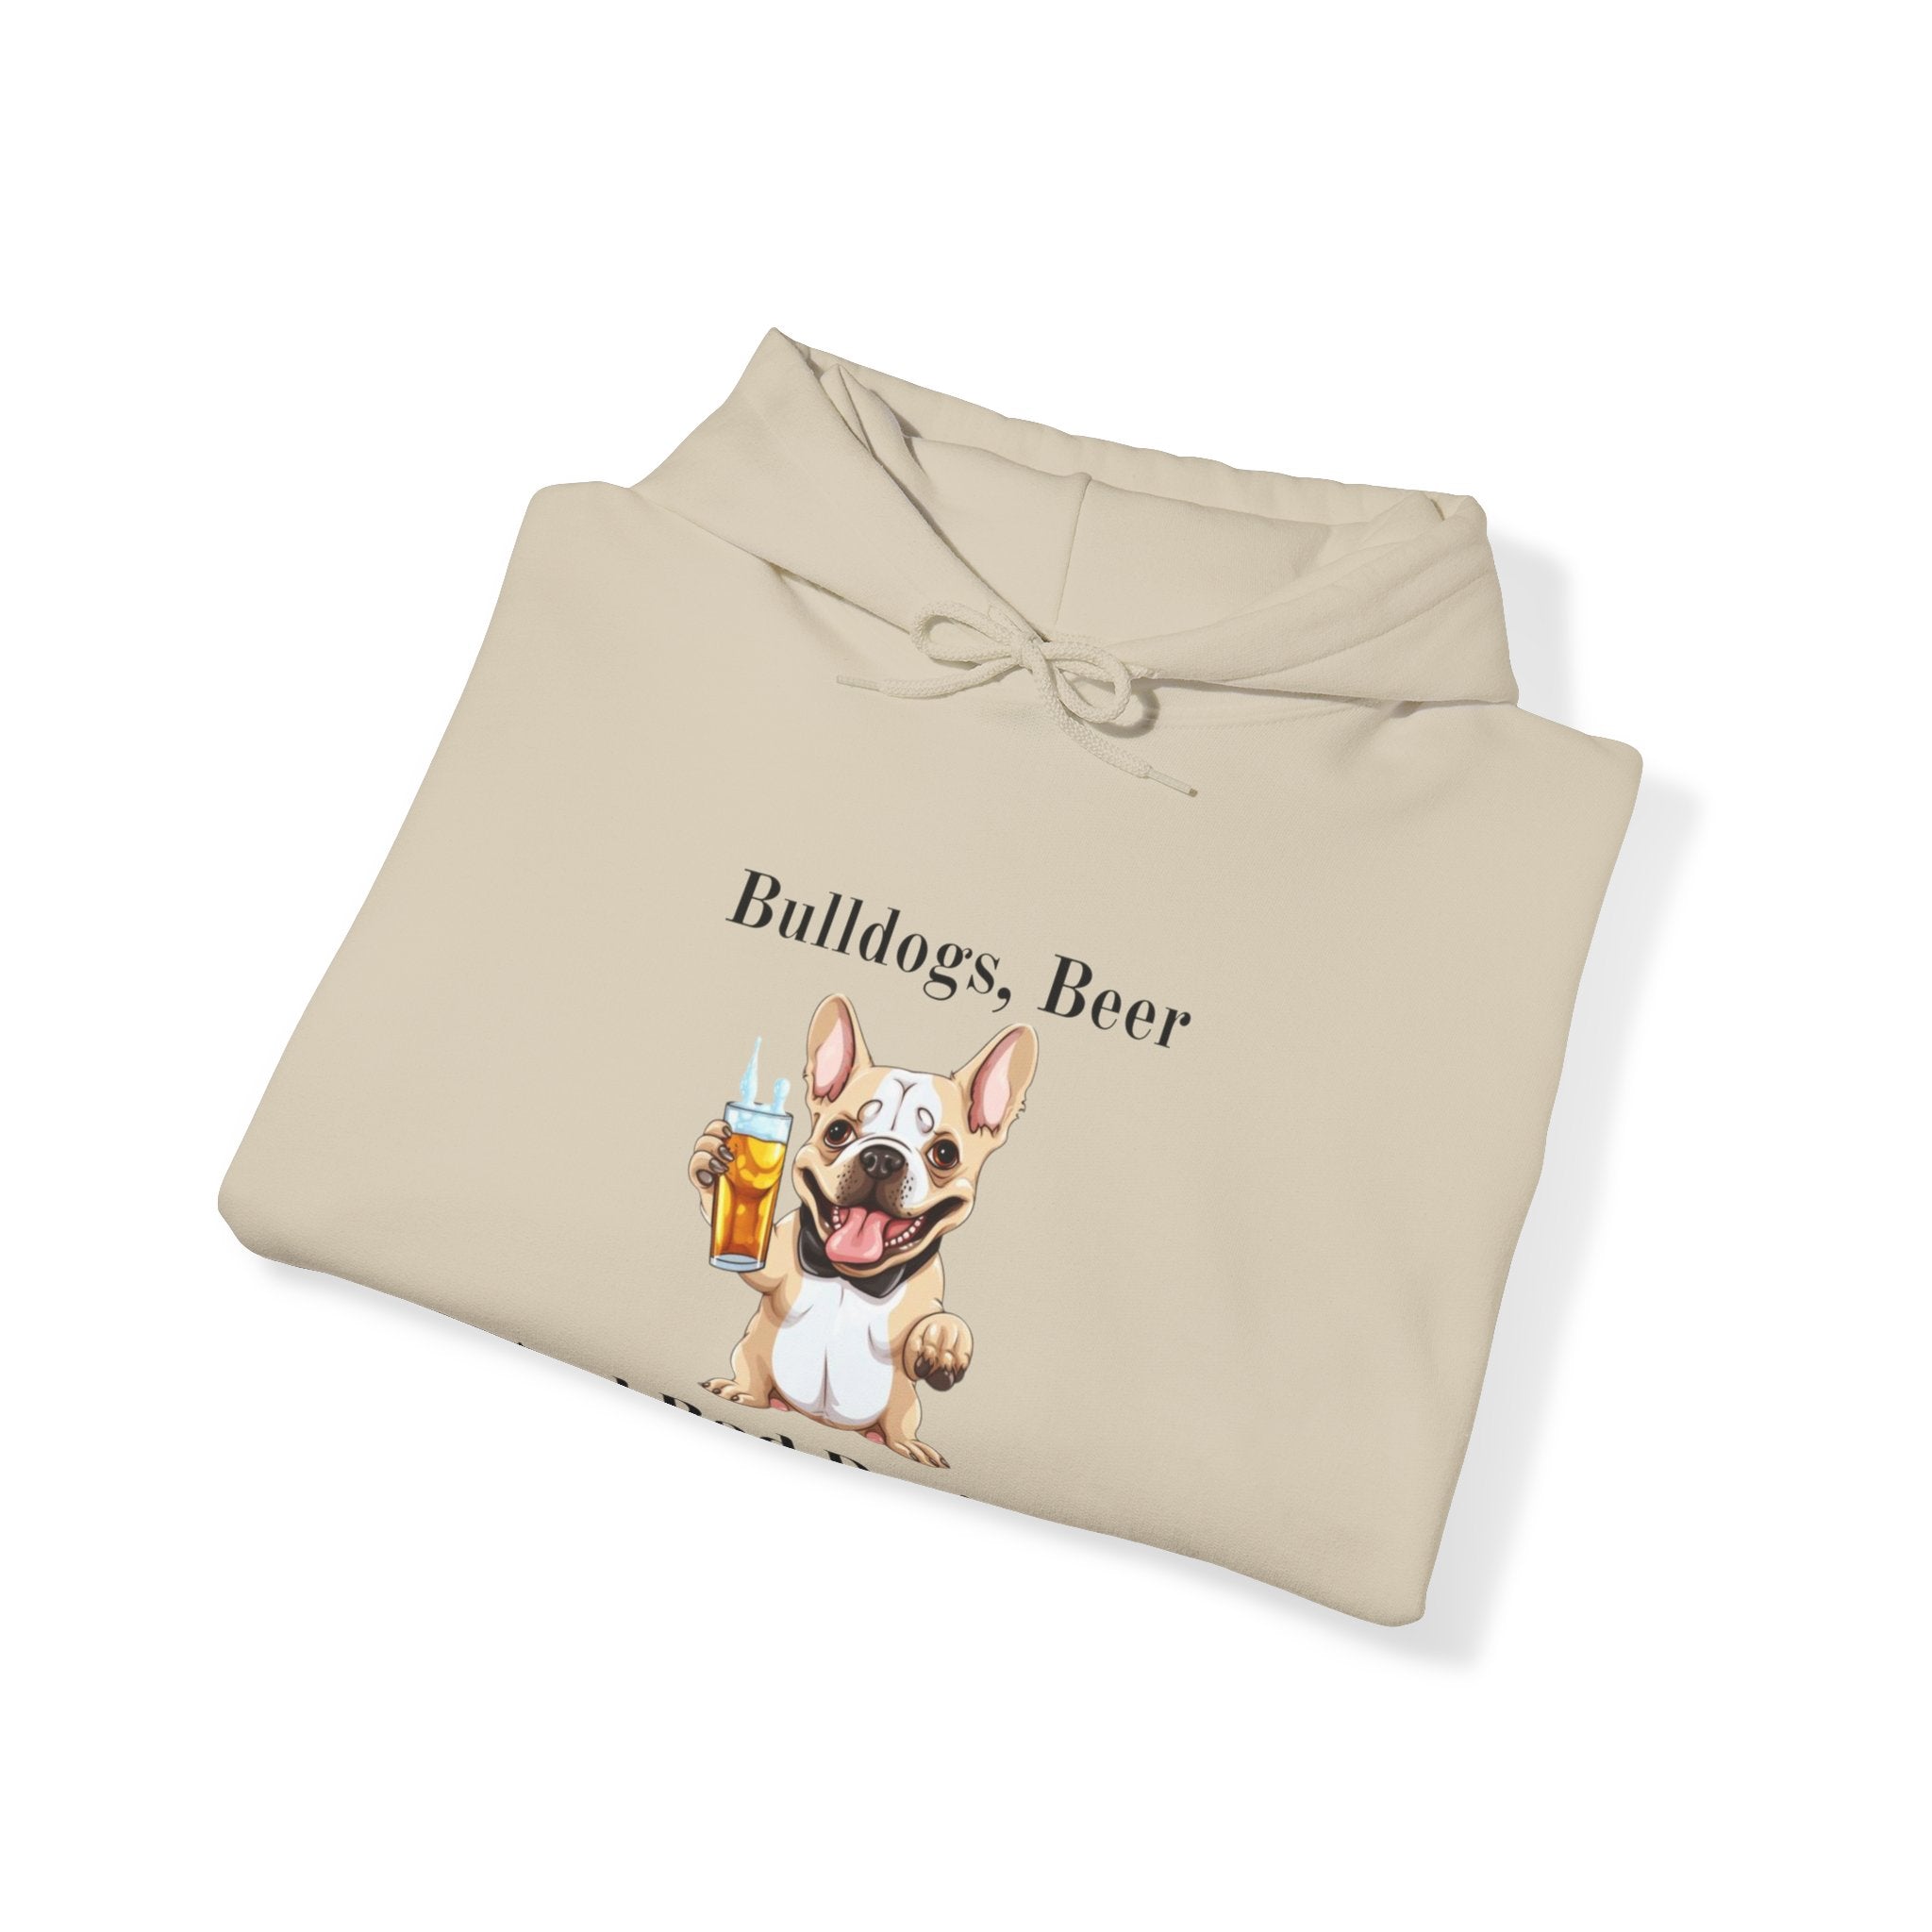 Bulldogs, Beer, and Bad Decisions" Hoodie - Your Go-To Gear for Mischievous Times! (French/White)